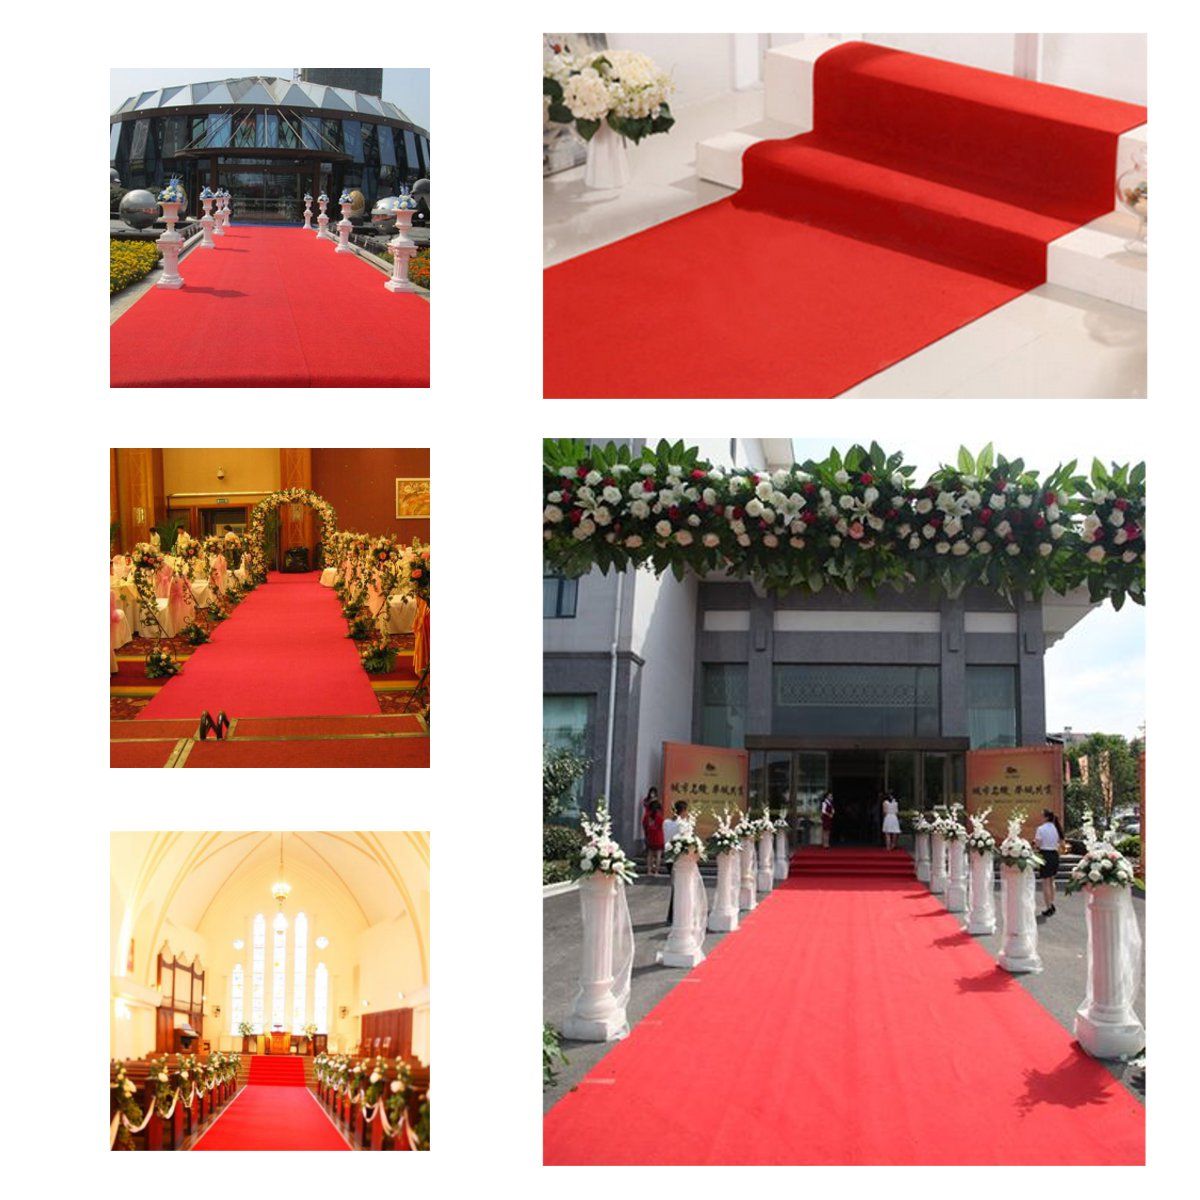 80-x-300cm-Red-Carpet-Wedding-Runners-Aisle-Floor-Rug-Hollywood-Party-Decorations-1351066